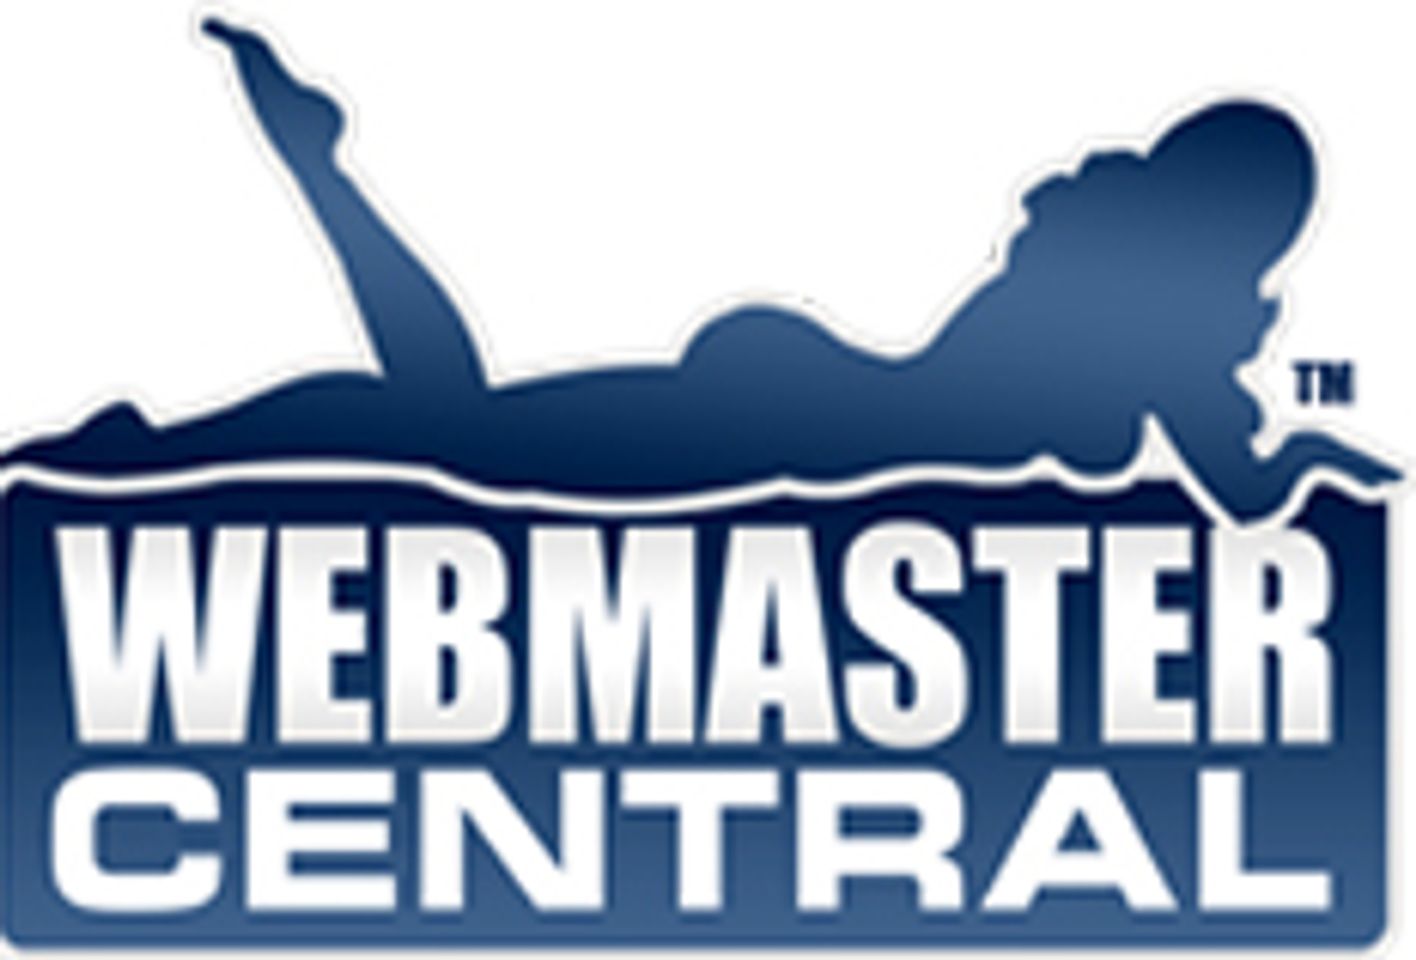 Webmaster Central Says "Size Does Matter"